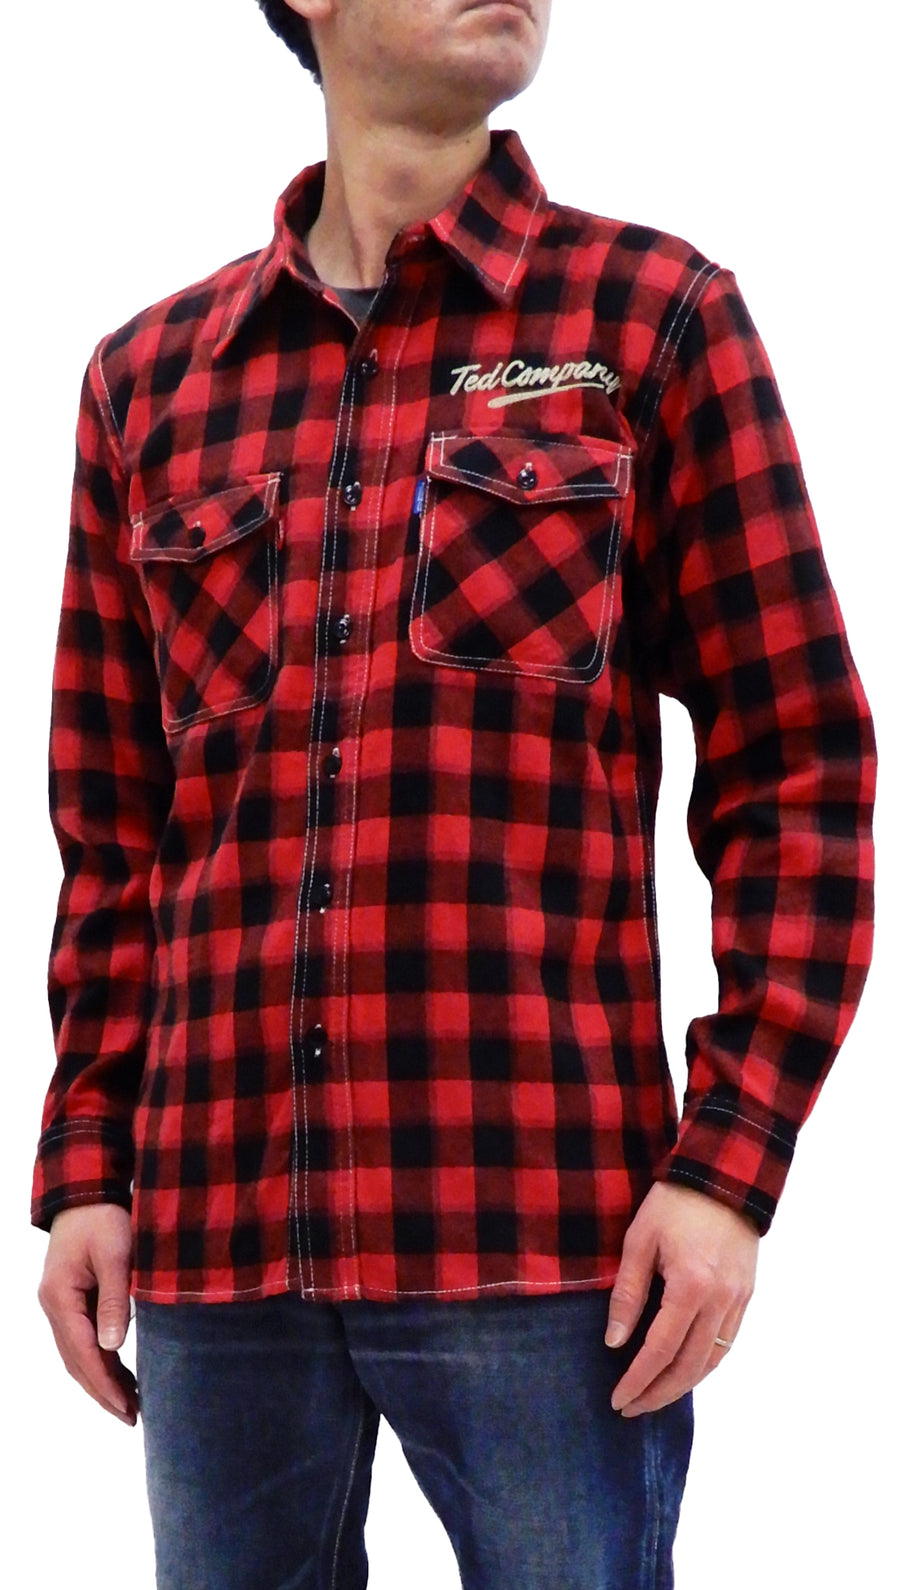 Alimens & Gentle Mens Long Sleeve Red Plaid Flannel Shirts Casual